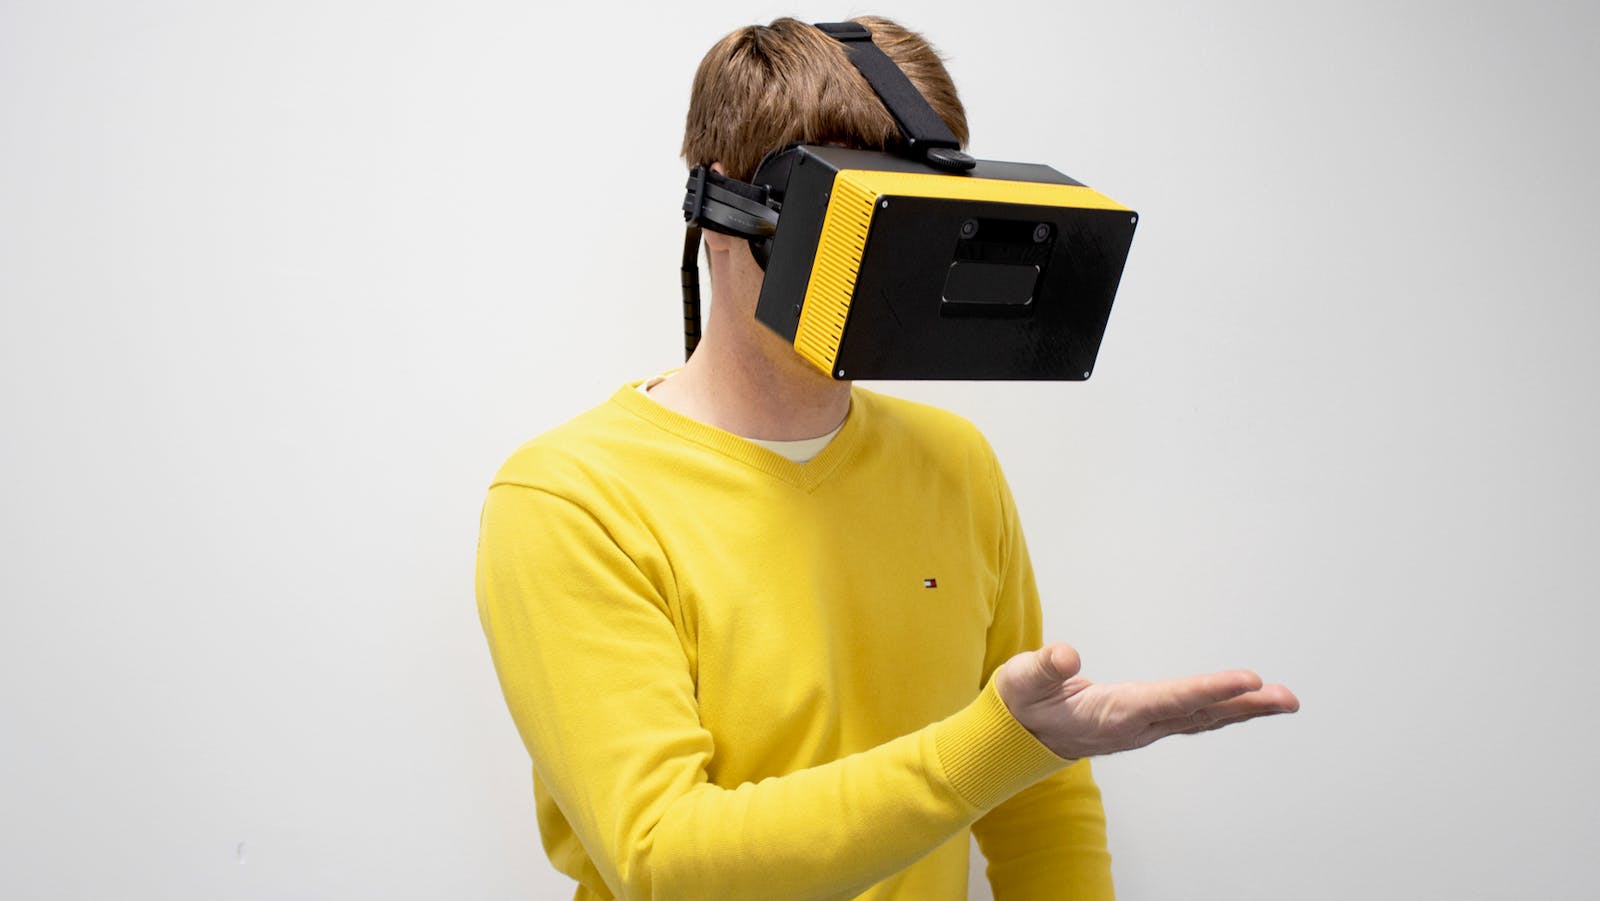 A prototype of a CREAL virtual reality headset. Photo provided by CREAL